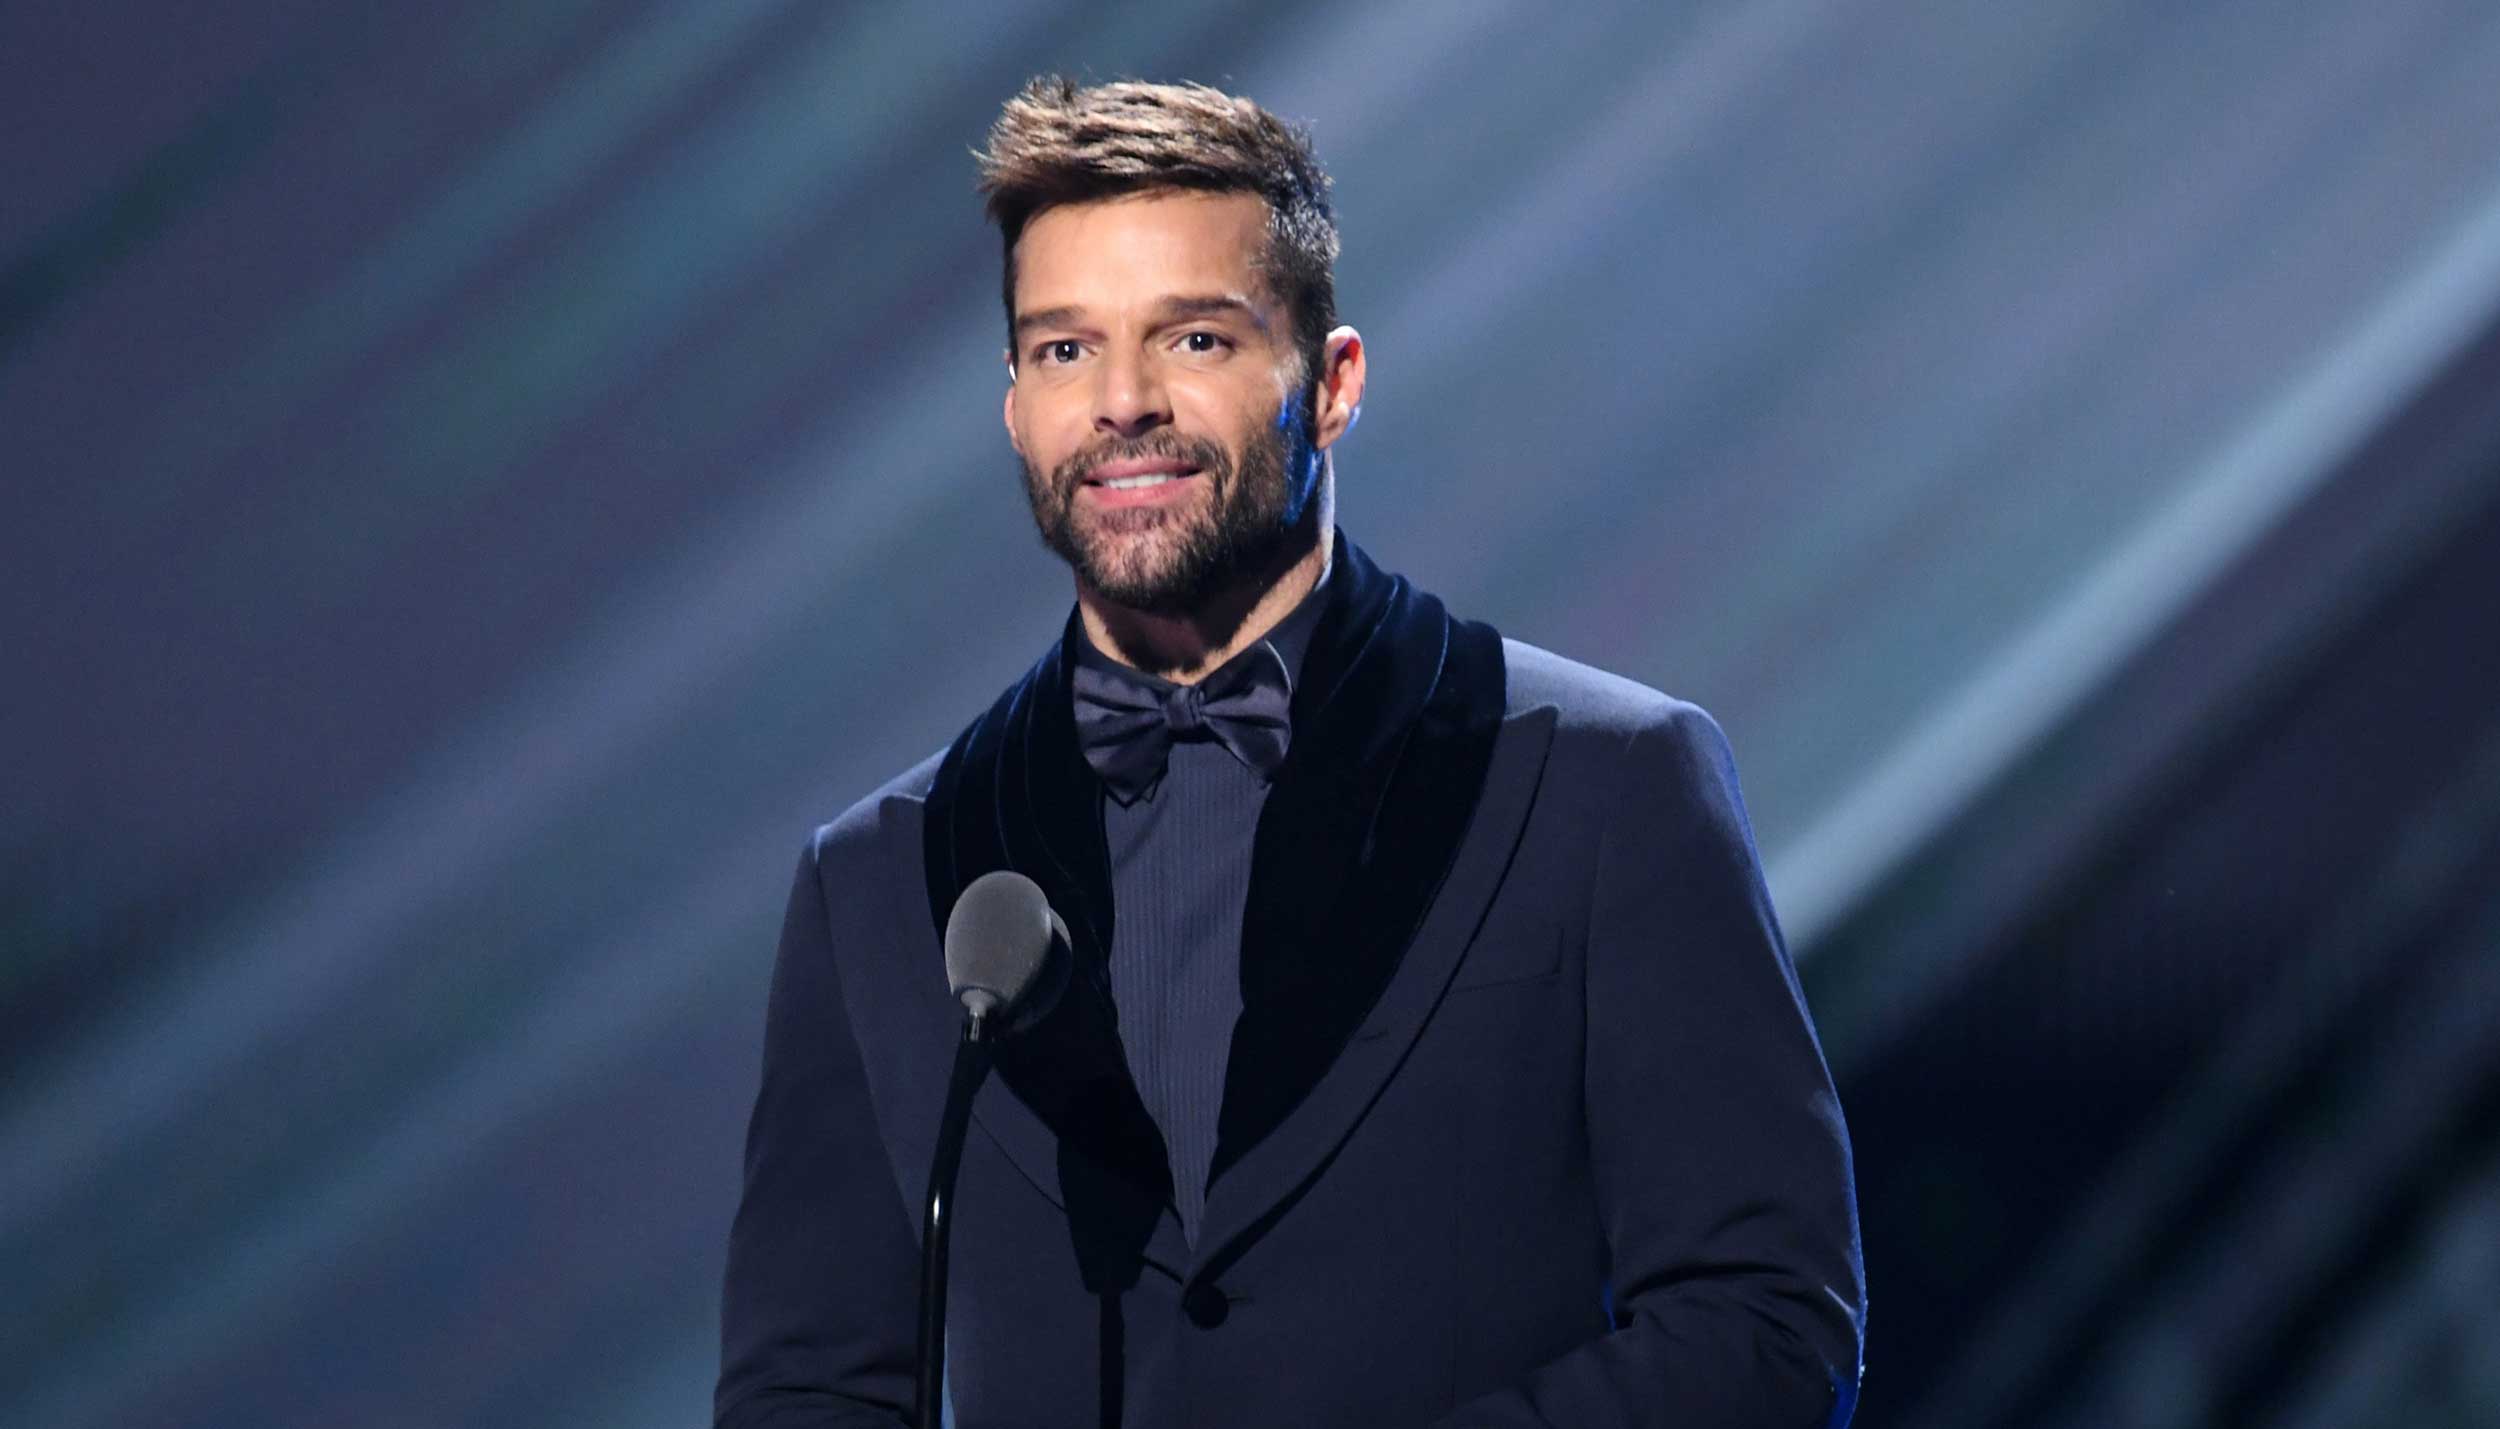 Ricky Martin Faces Domestic Violence Accusations Disproves Them As Falsehood